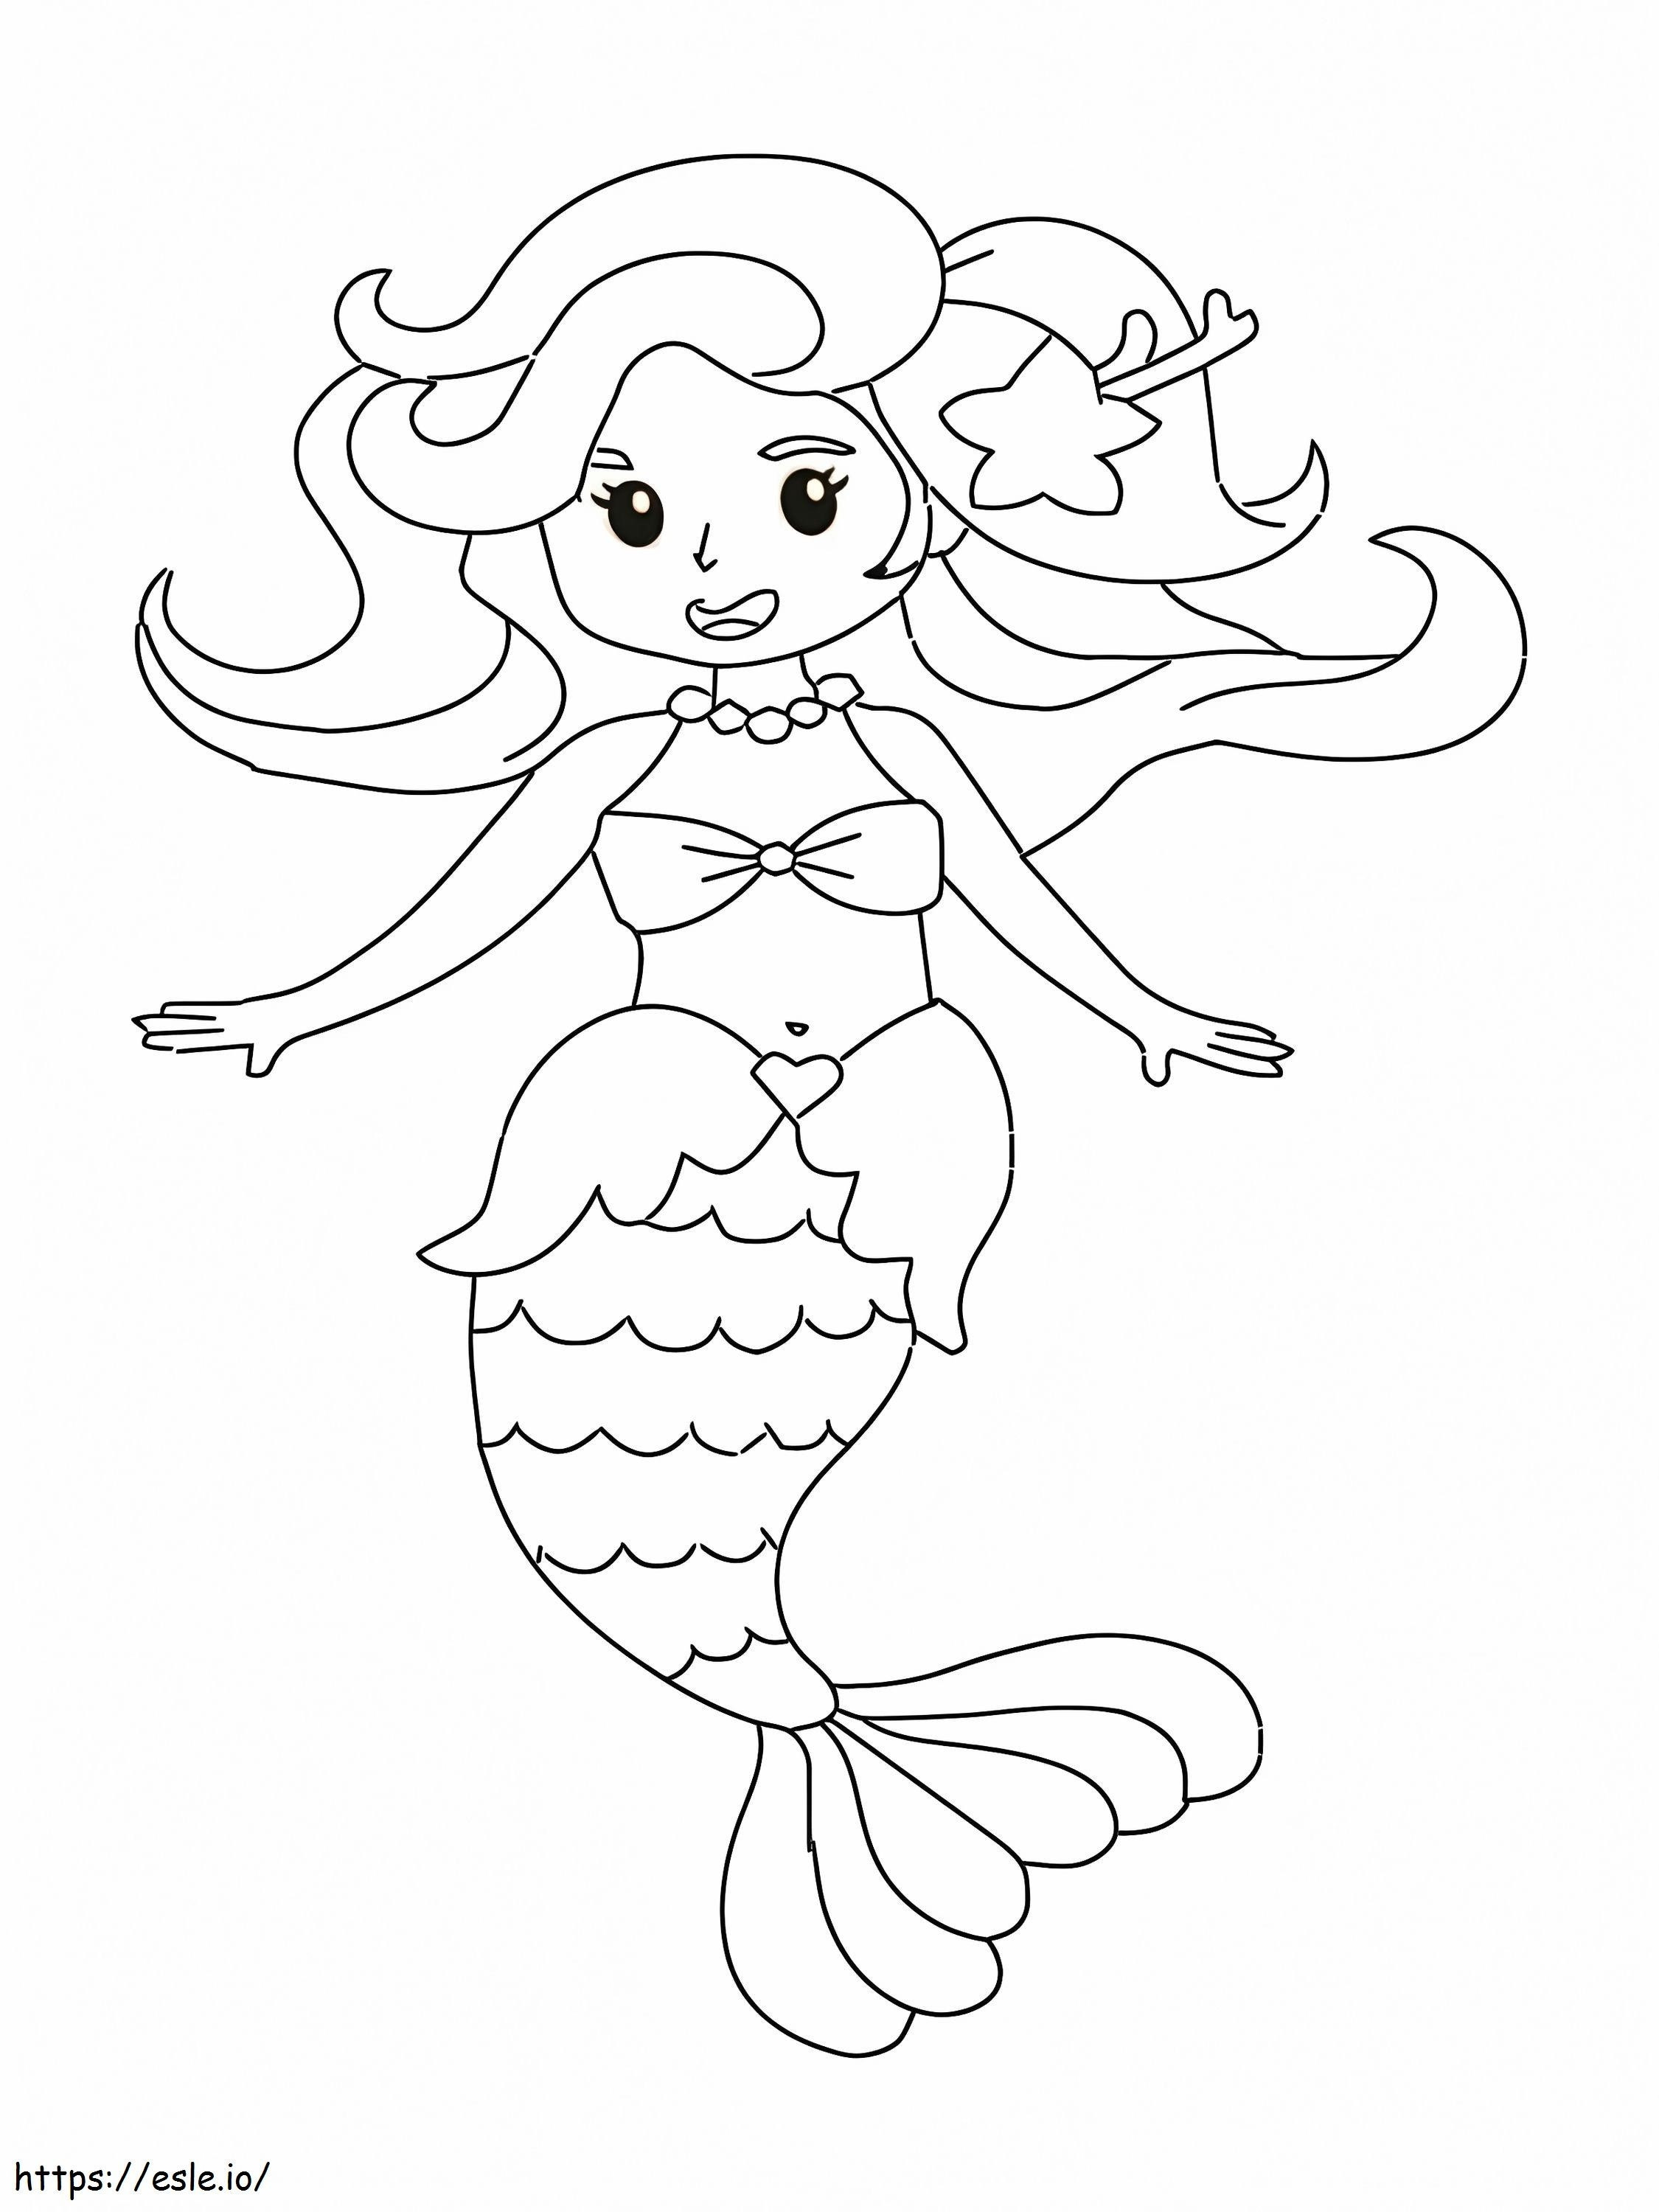 Mermaid With Wavy Hair coloring page